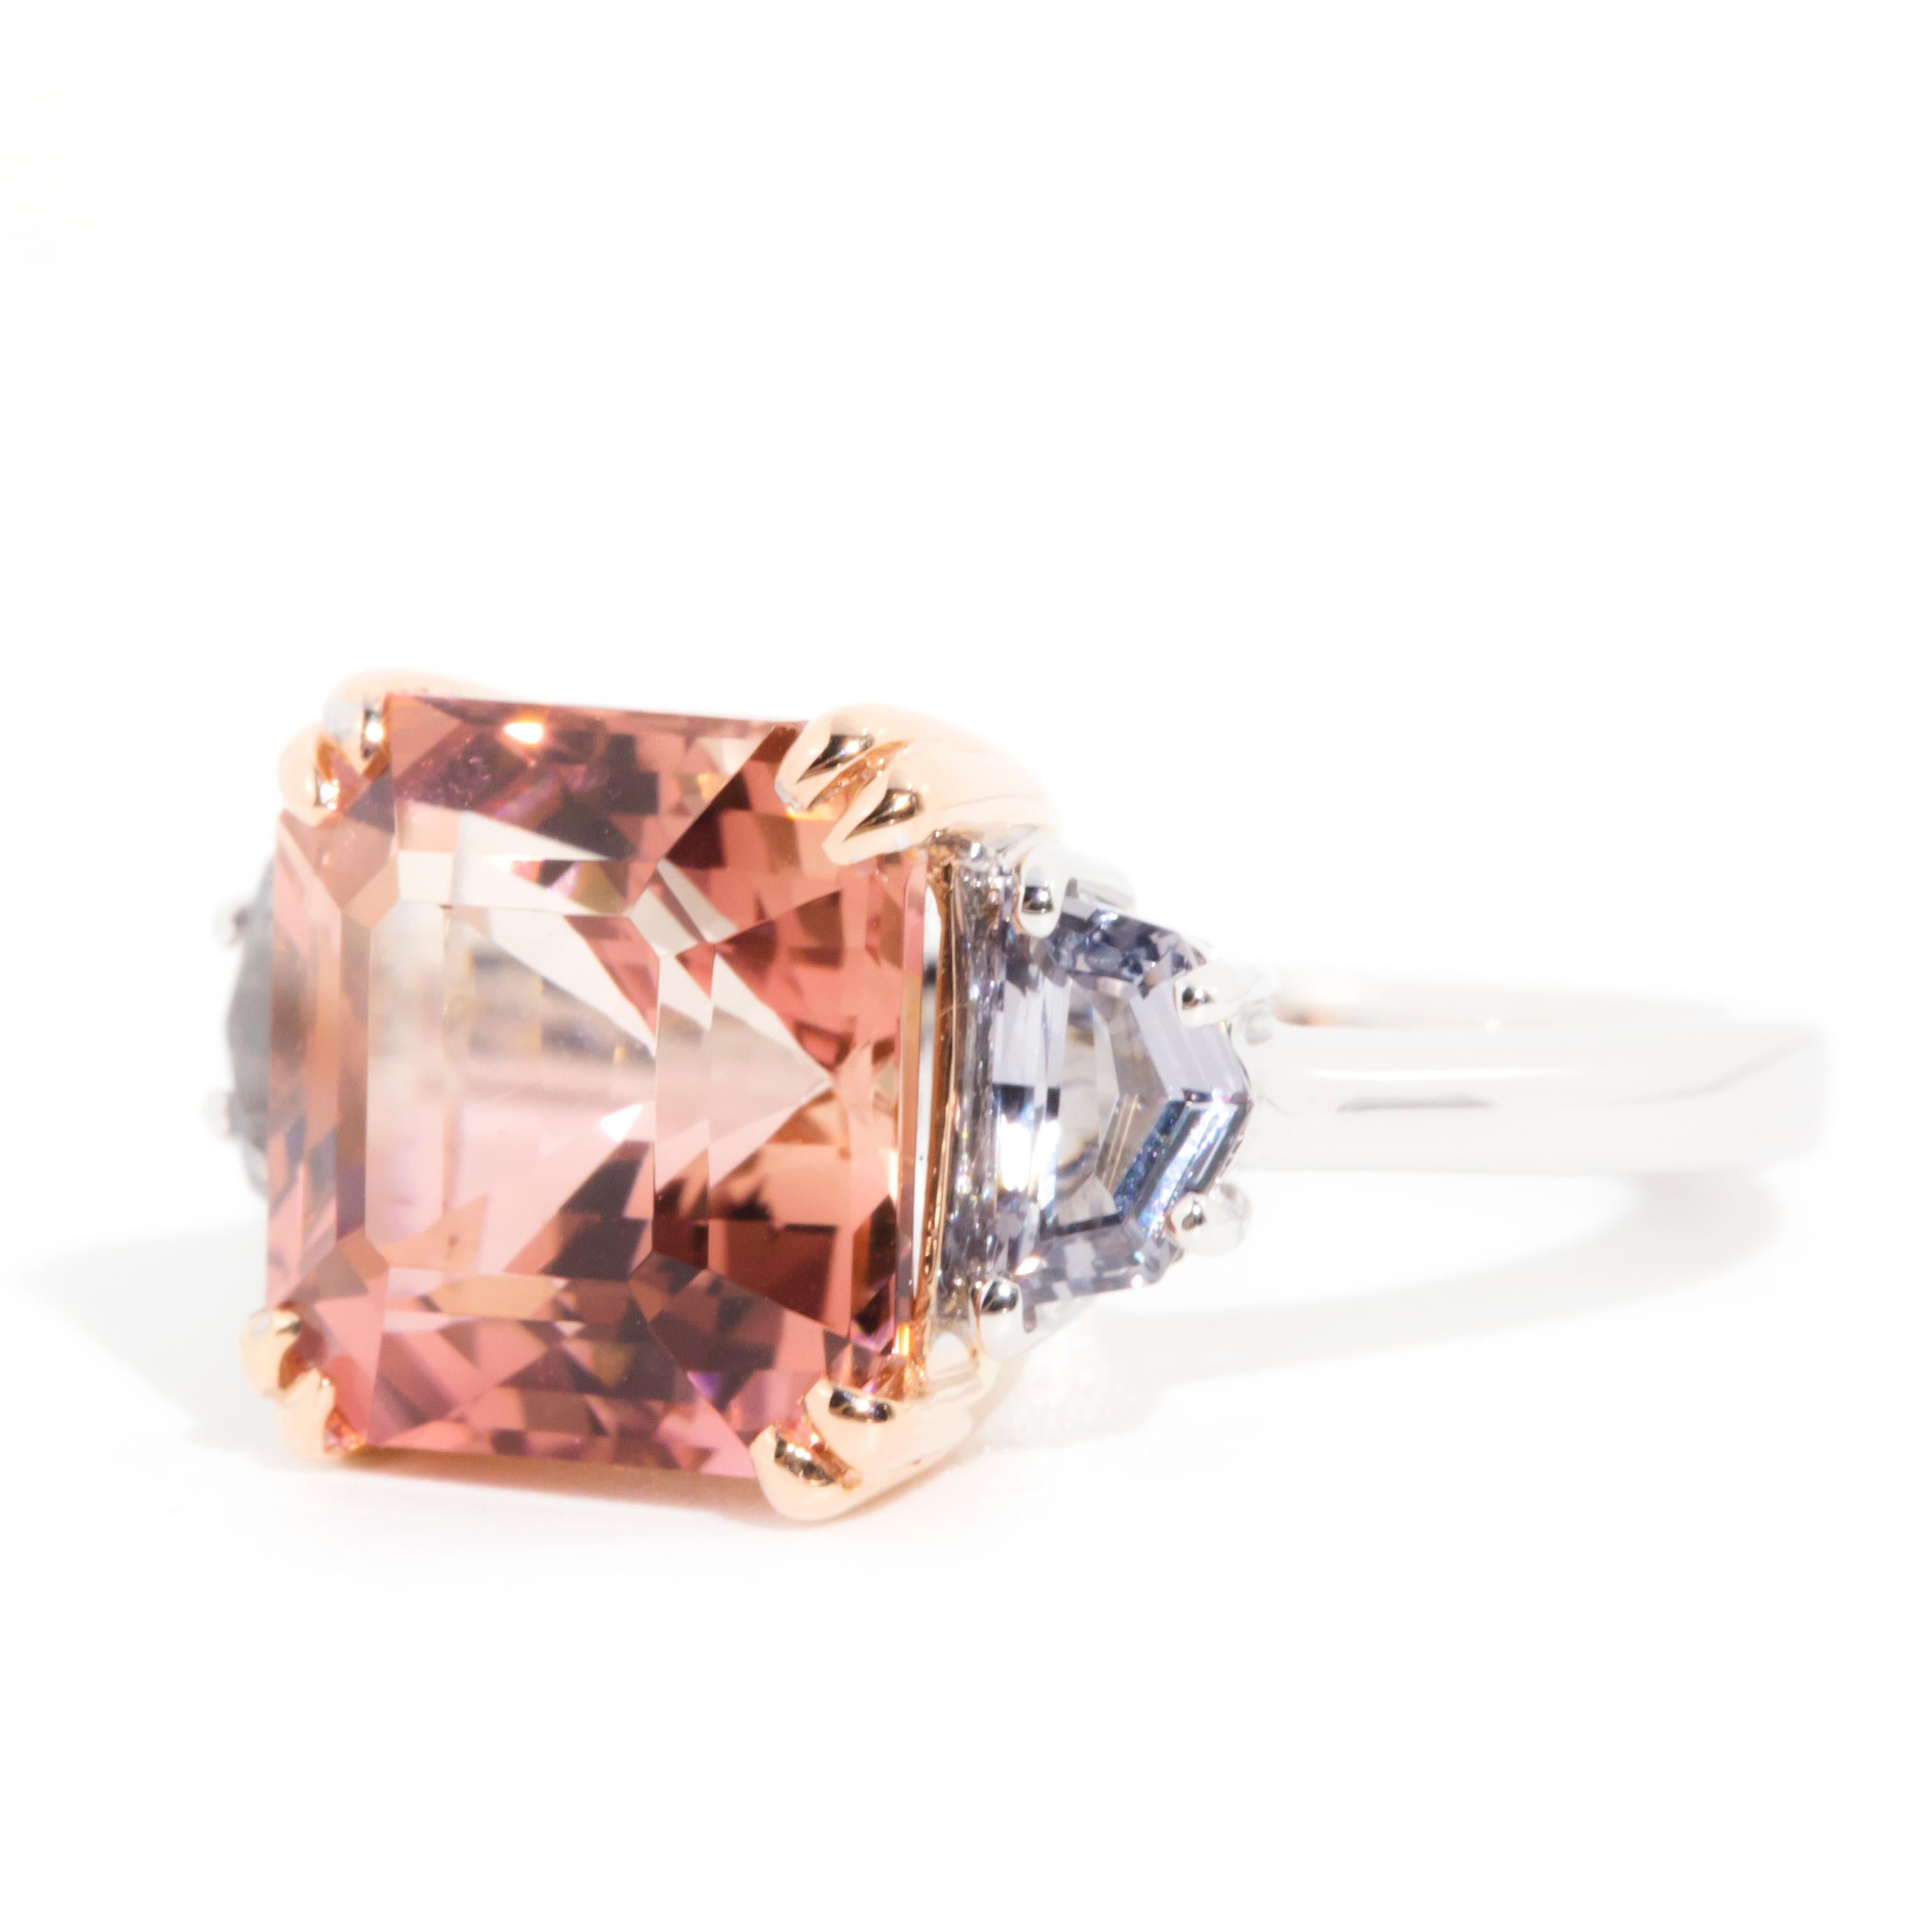 5.93 Carat Bi-Colour Tourmaline and Spinel Three Stone Ring in 18 Carat Gold 2